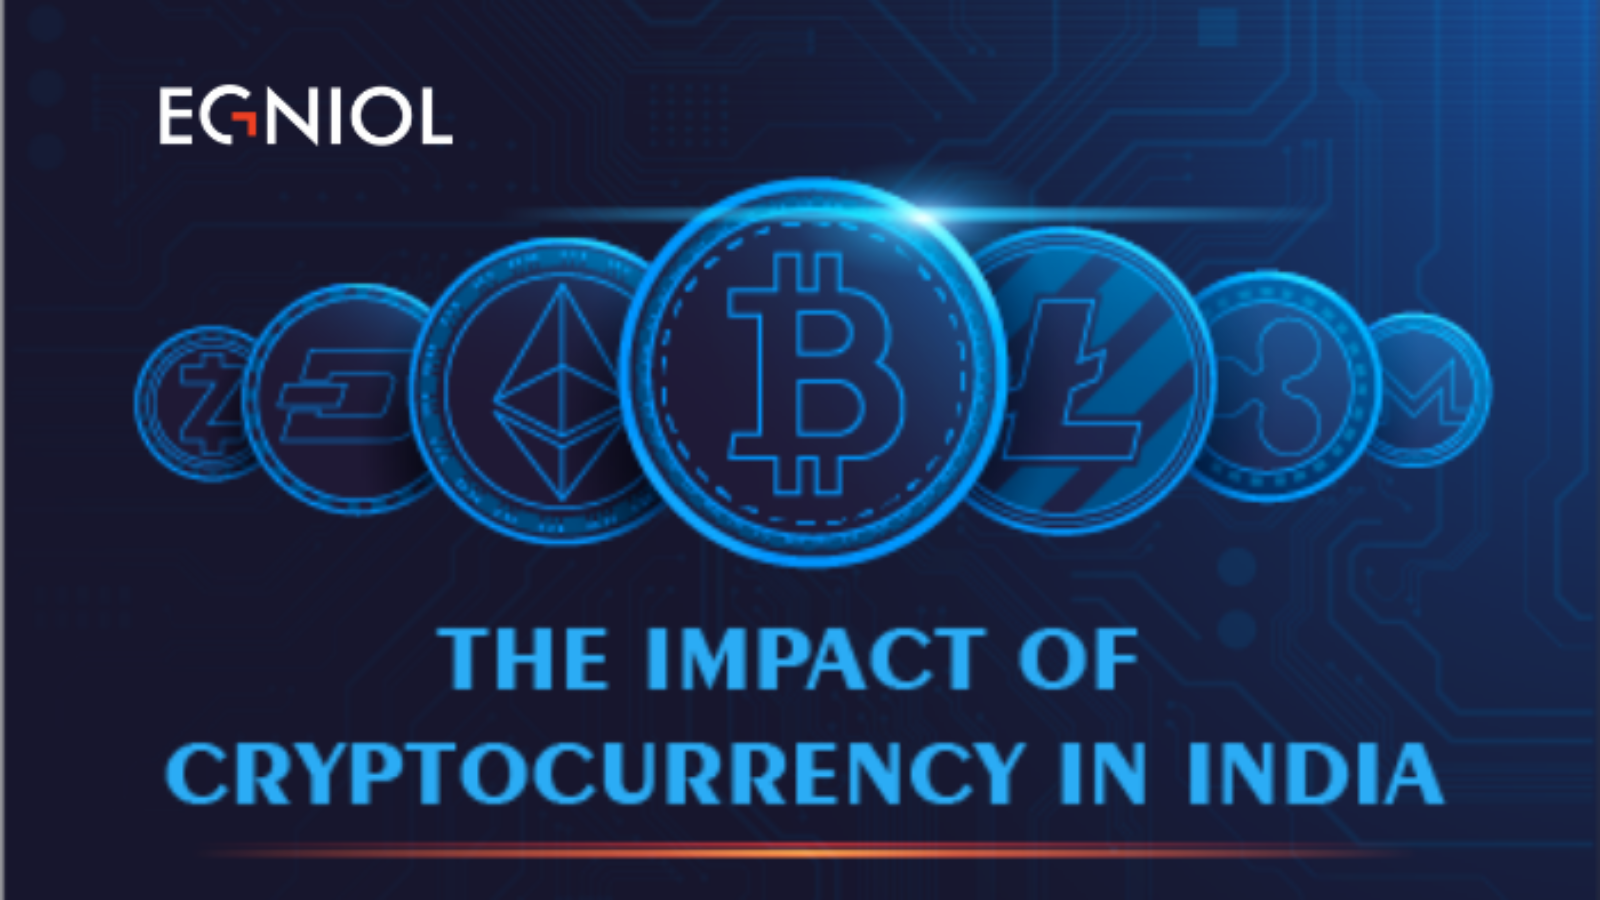 The Impact of Cryptocurrency in India - By Egniol